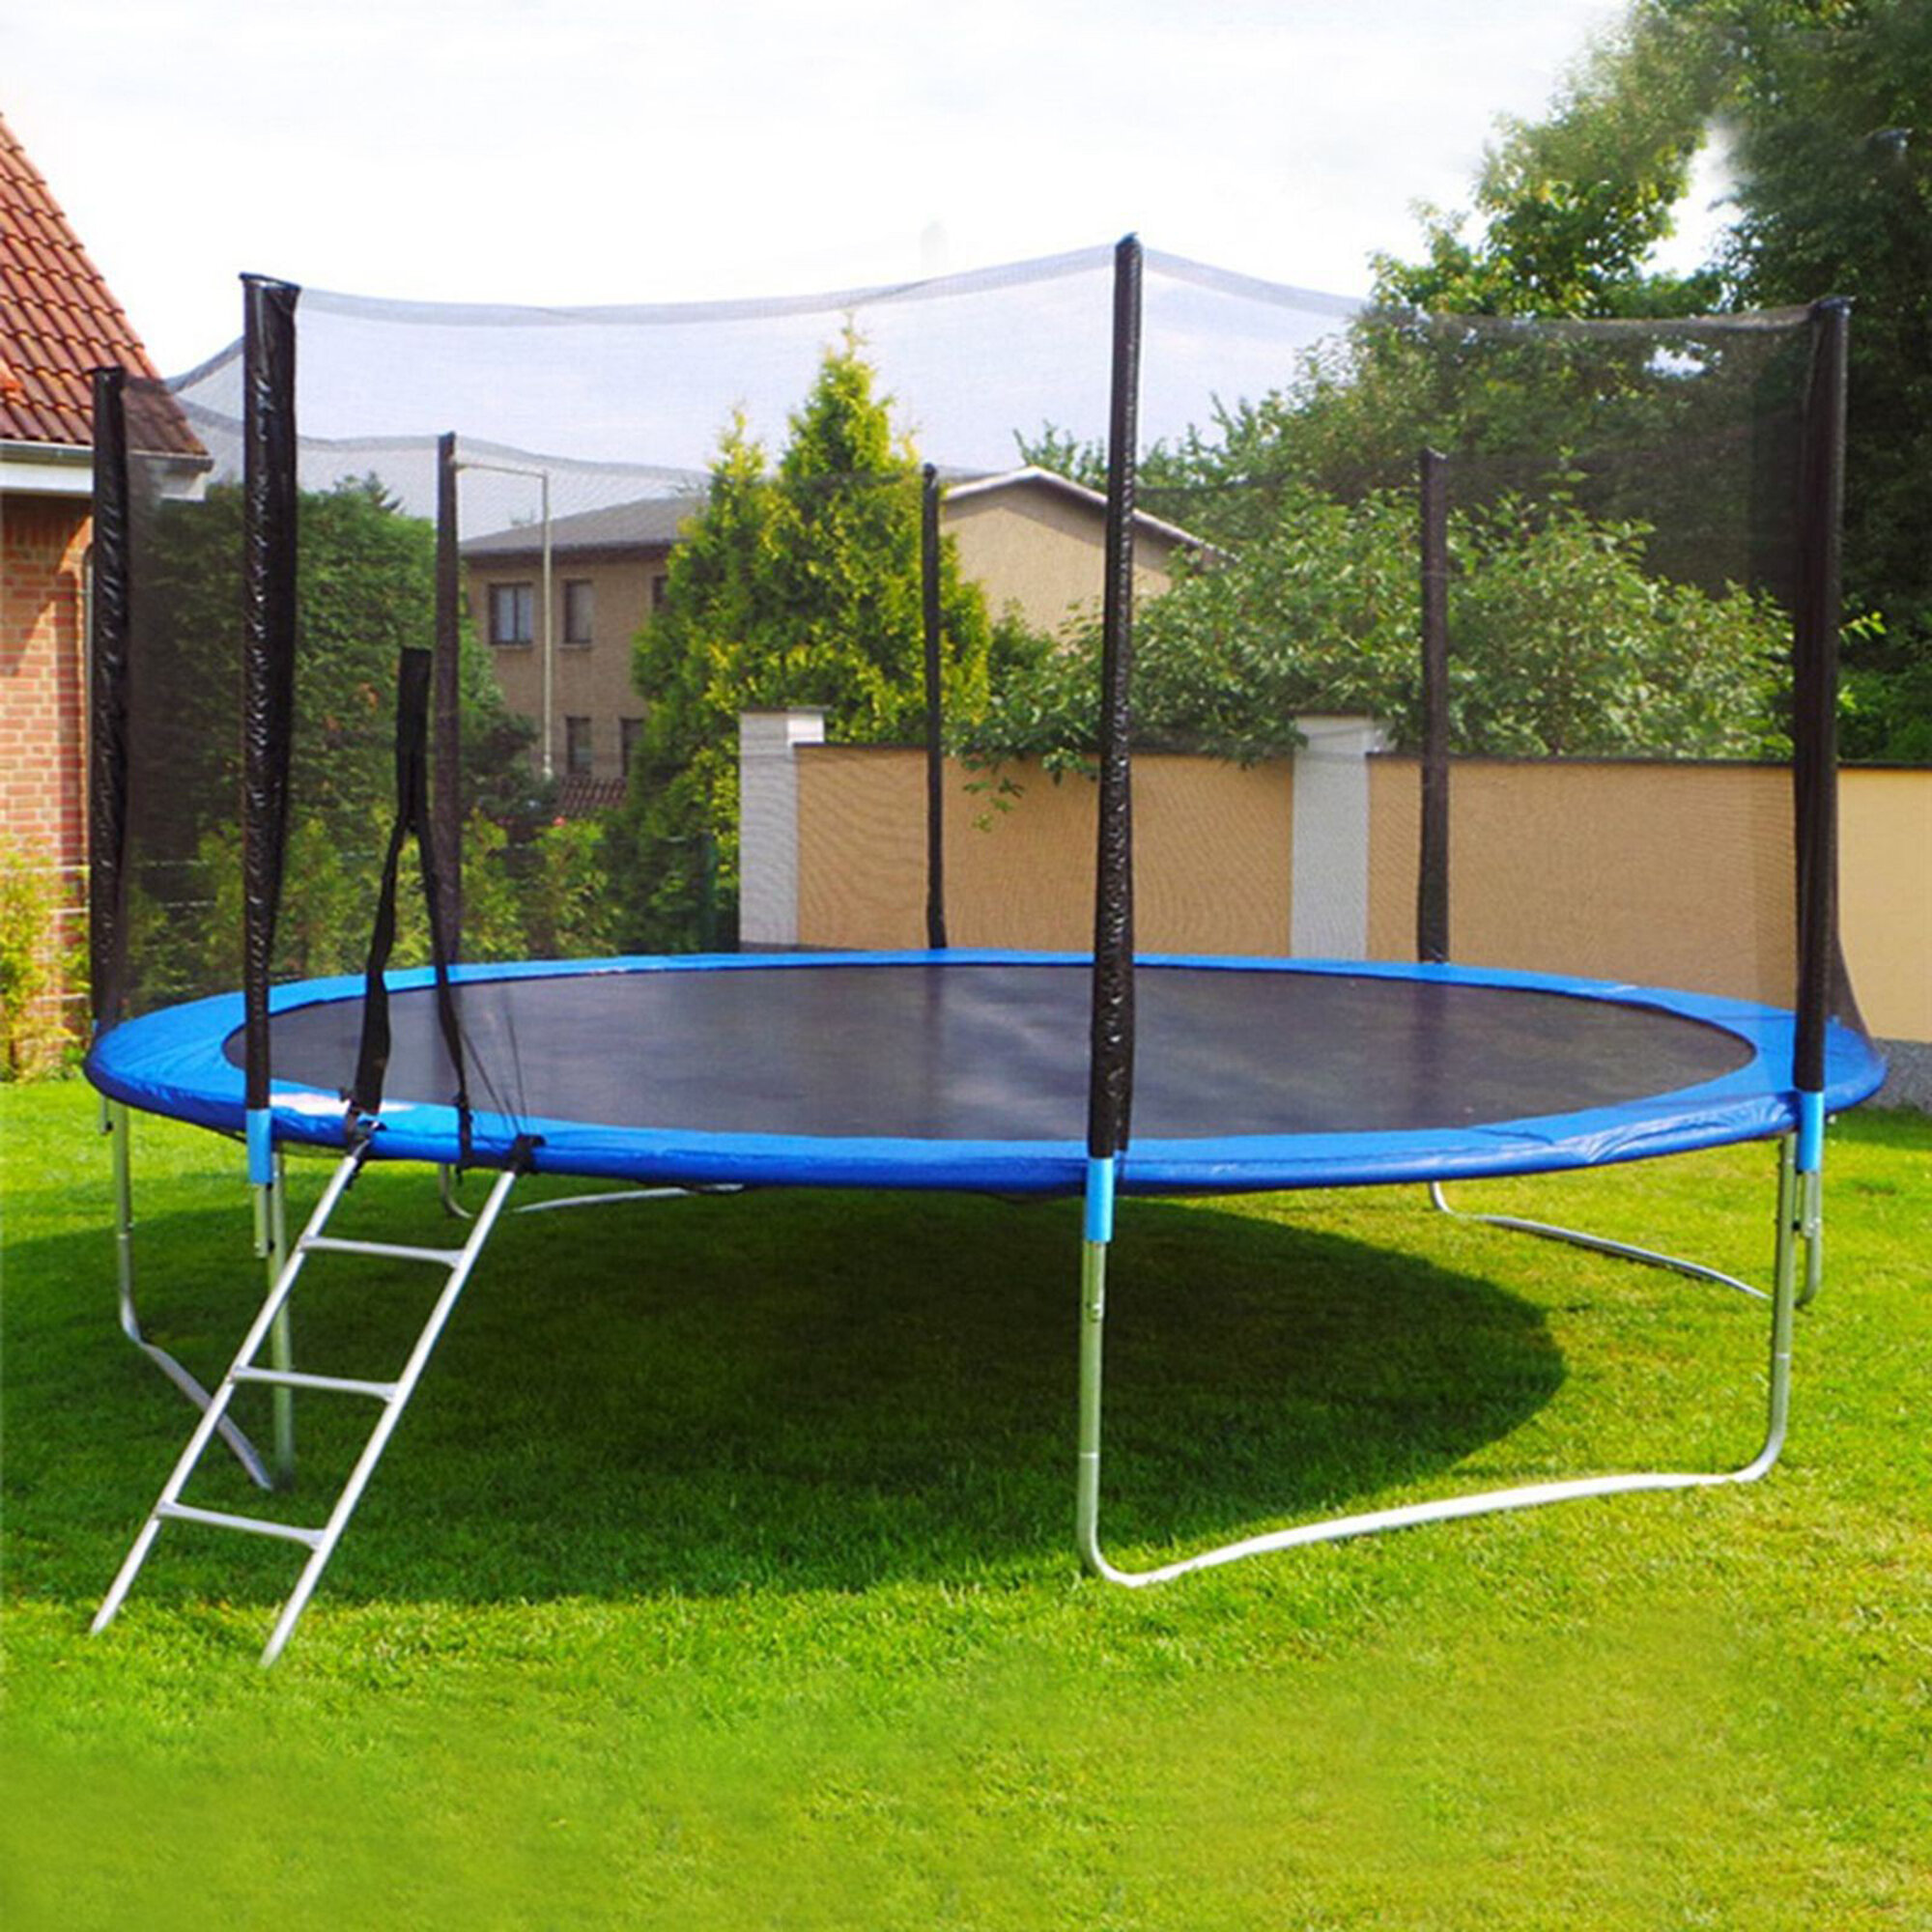 10 FT Kids Trampoline With Enclosure Net Jumping Mat And Spring Cover Padding